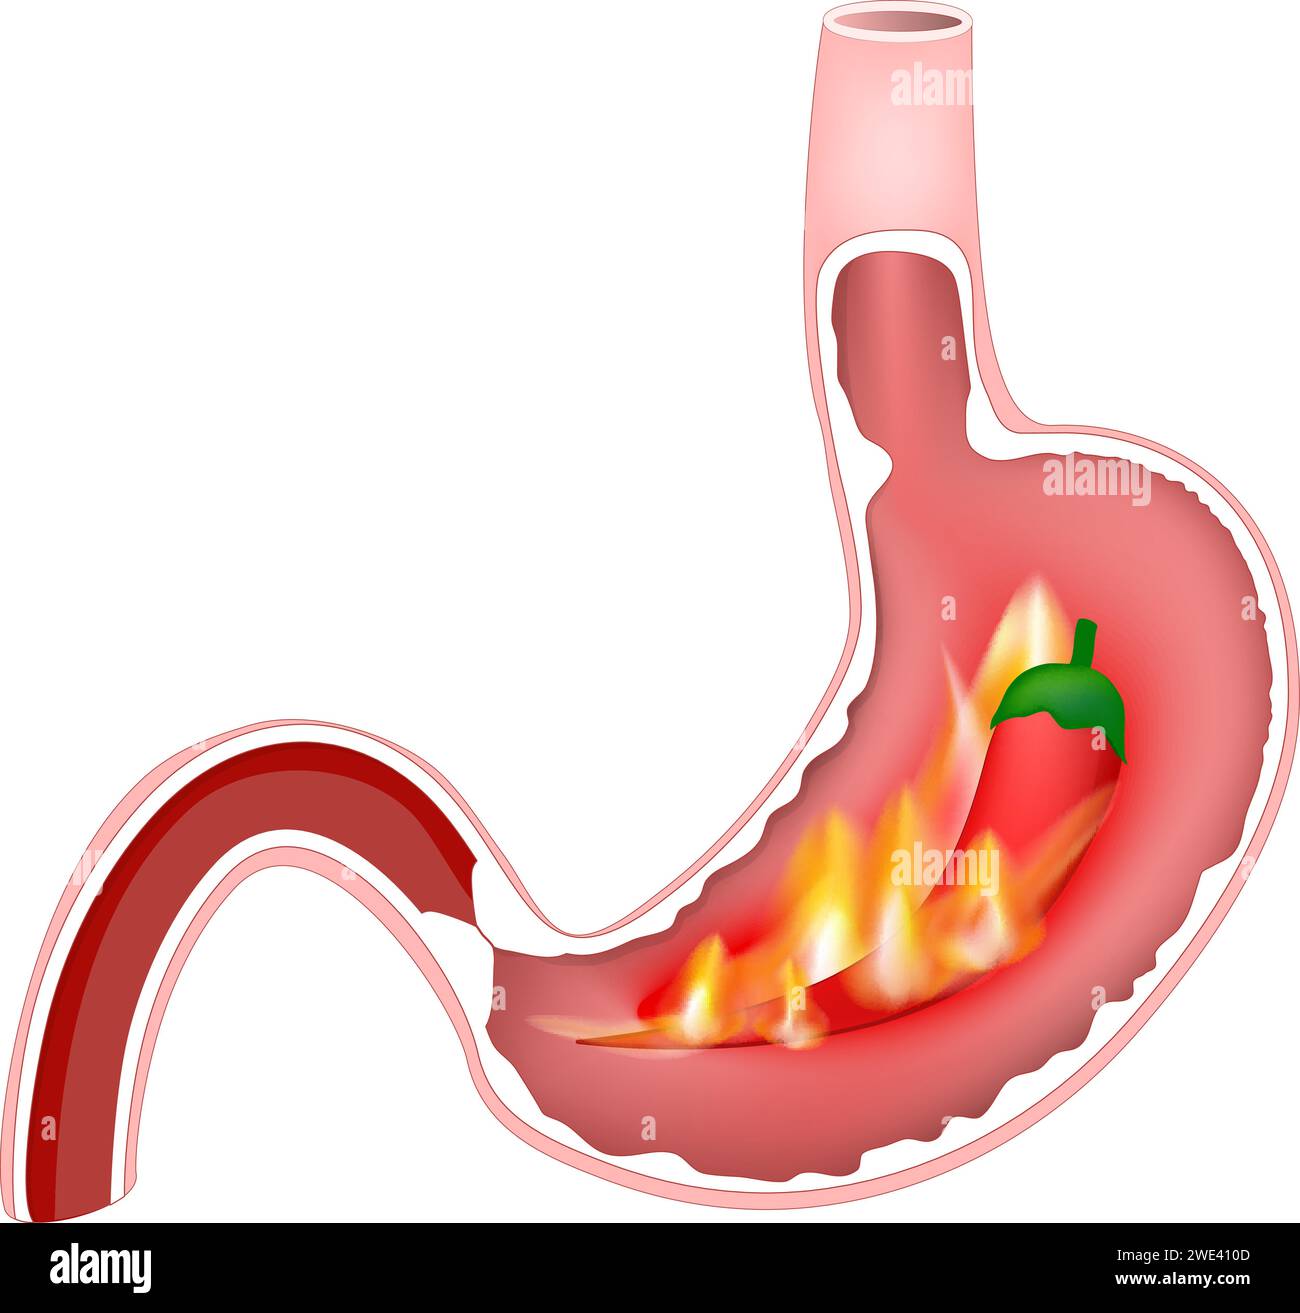 Heartburn of stomach. Cross section of stomach with hot flames and red chili pepper. Pyrosis, cardialgia or acid indigestion. burning sensation in the Stock Vector